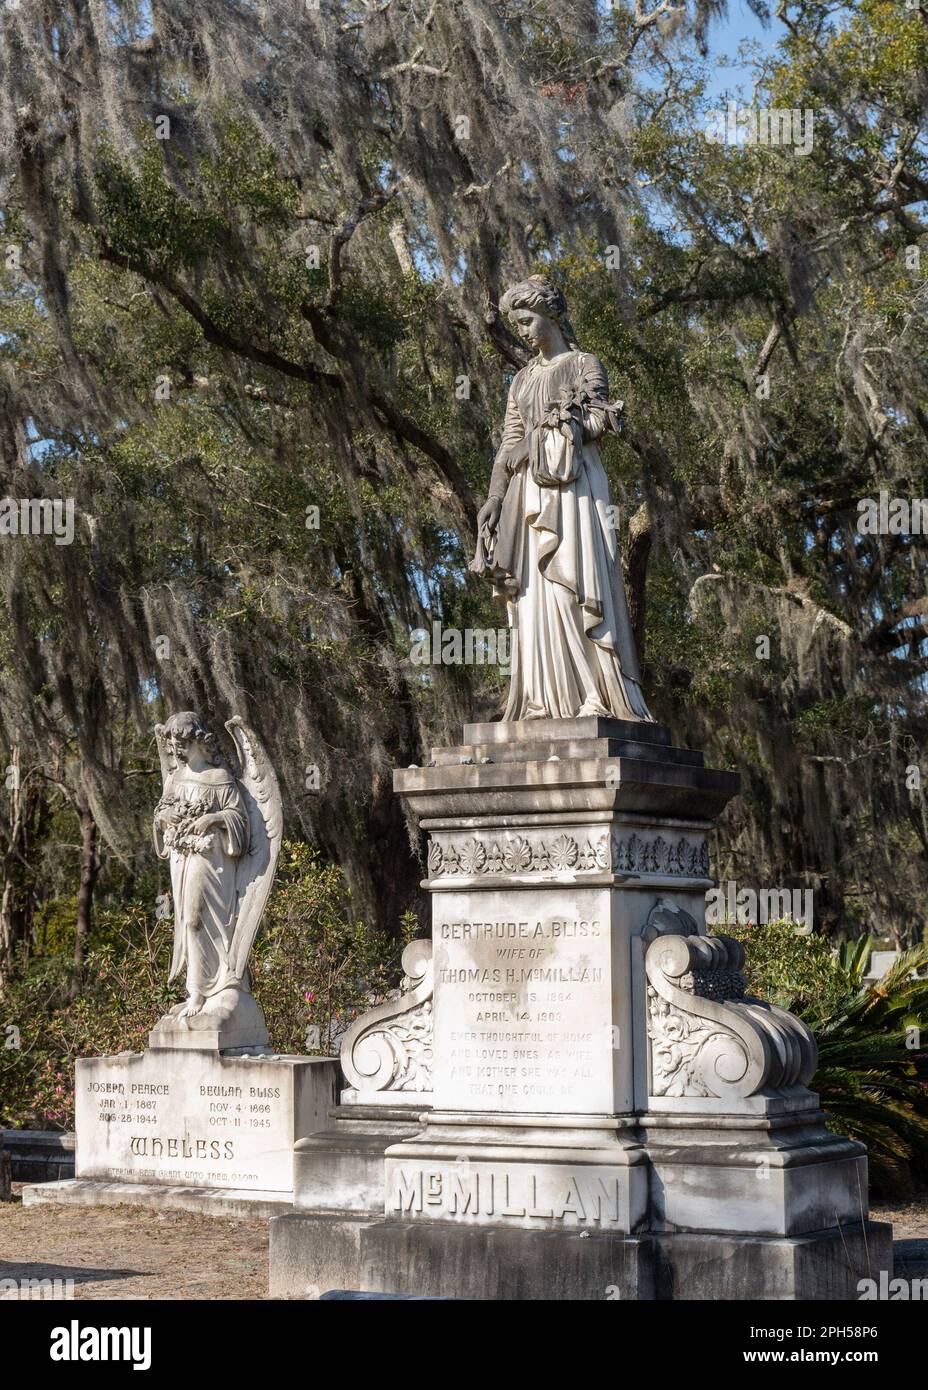 Savannah, Georgia - February 20, 2023:  View of historic Bonaventure Cemetery with graves and scenic landscape in view. Stock Photo